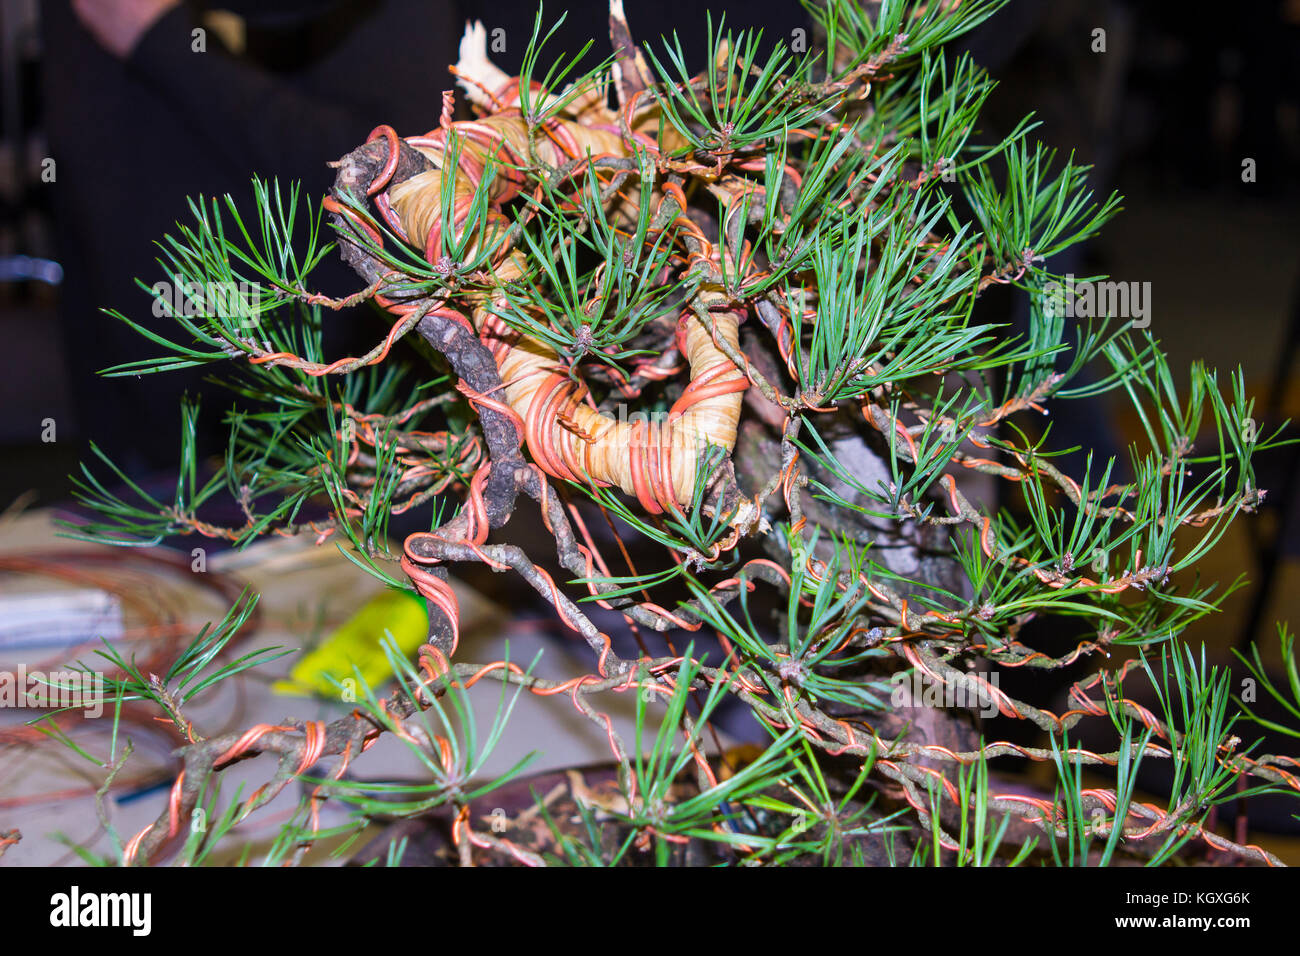 Rafia and copper wire used in the bending of branches in the early stages of the styling and development of a bonsai from a collected Scots Pine tree Stock Photo